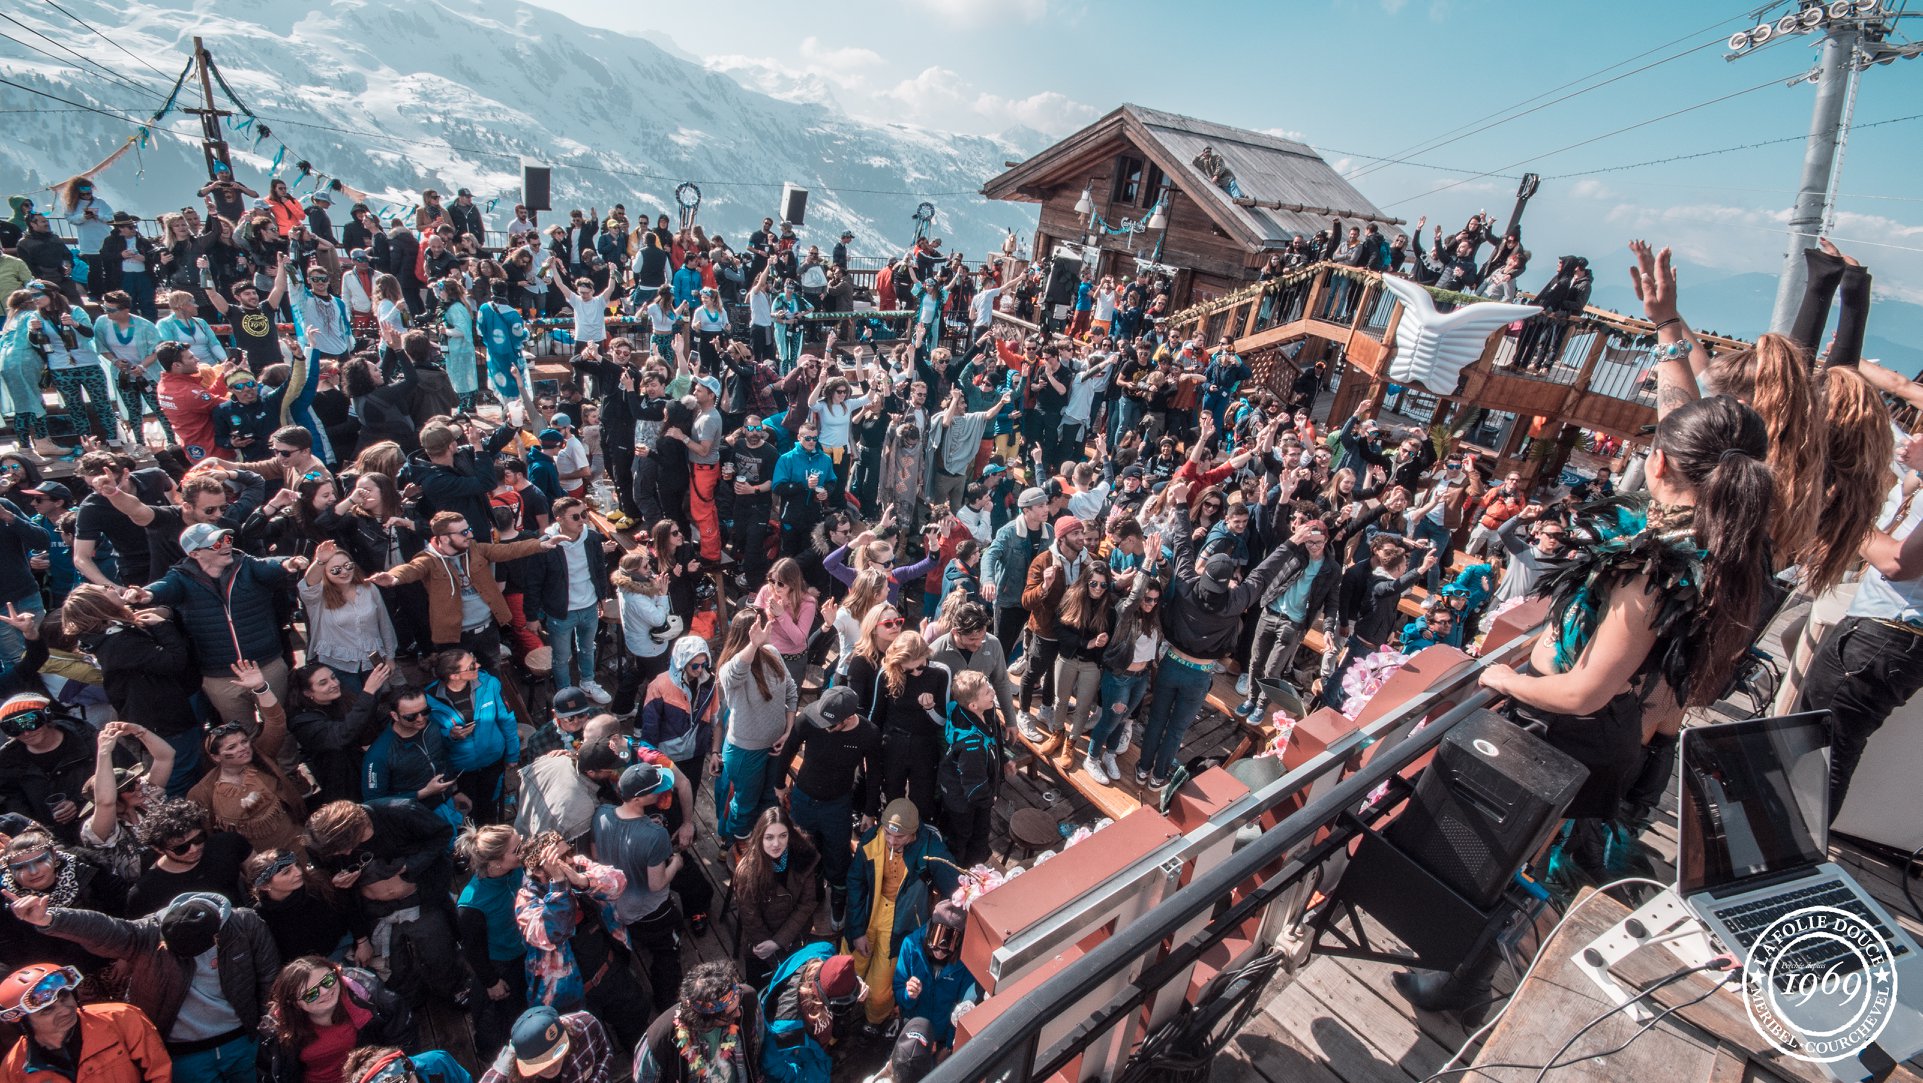 large crowd partying outdoors in the mountains at folie douce meribel